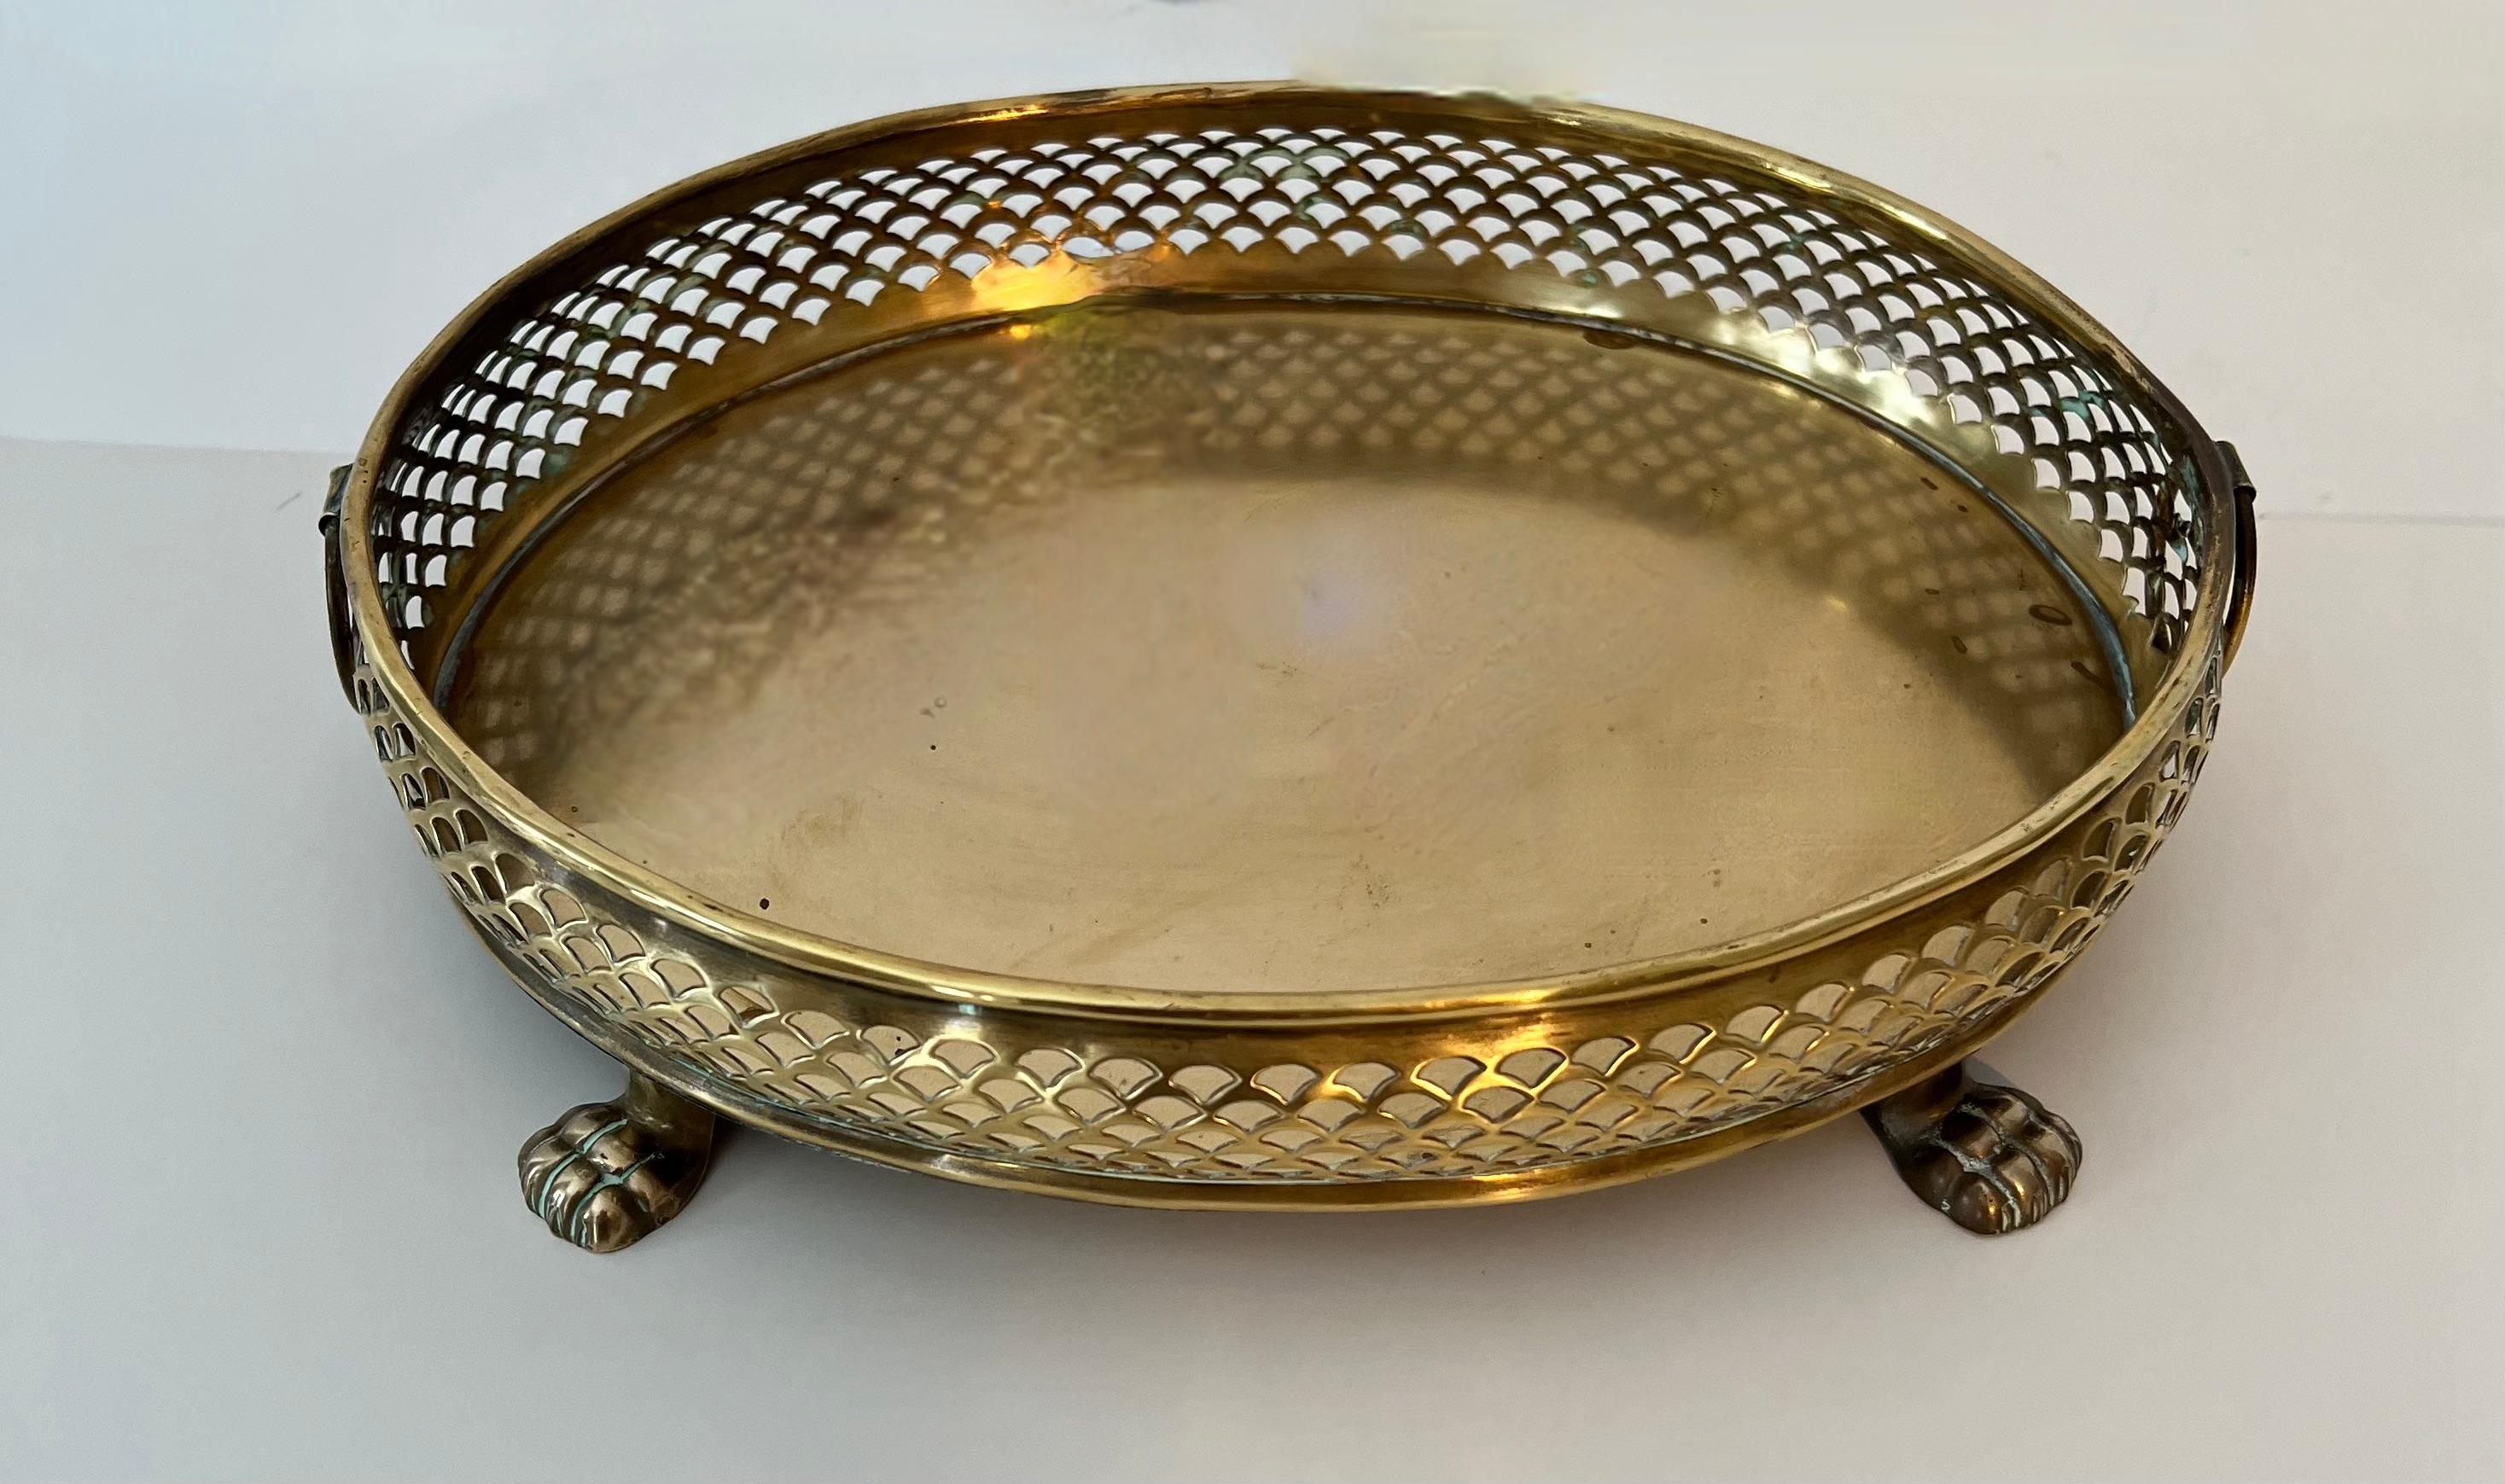 A lovely paw footed solid brass tray with a uniquely woven look gallery. The piece has decorative rings on the side. A compliment to any cocktail table of bar - while a great bar or dining room piece also would work well at a work station or on a